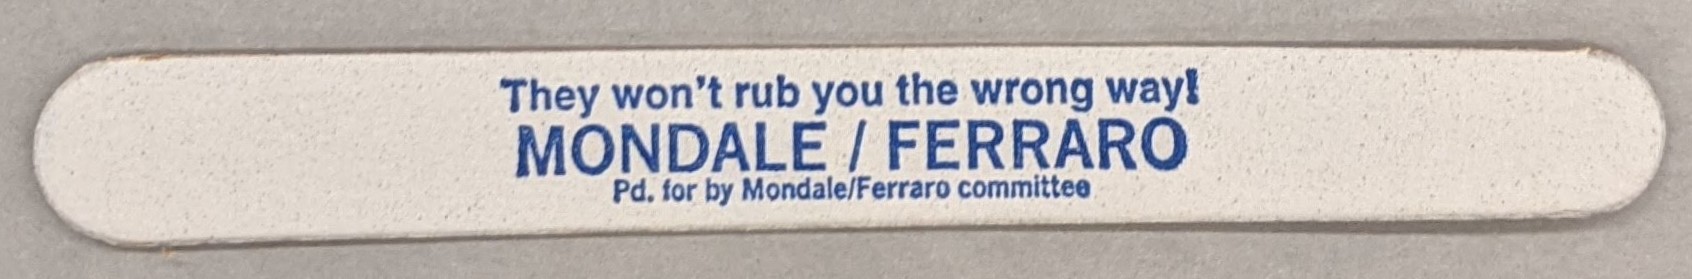 Mondale/Ferraro Committee, “Mondale/Ferraro, They won’t rub you the wrong way!” nail file, 1988, from the Jerome O. Herlihy political campaign ephemera collection